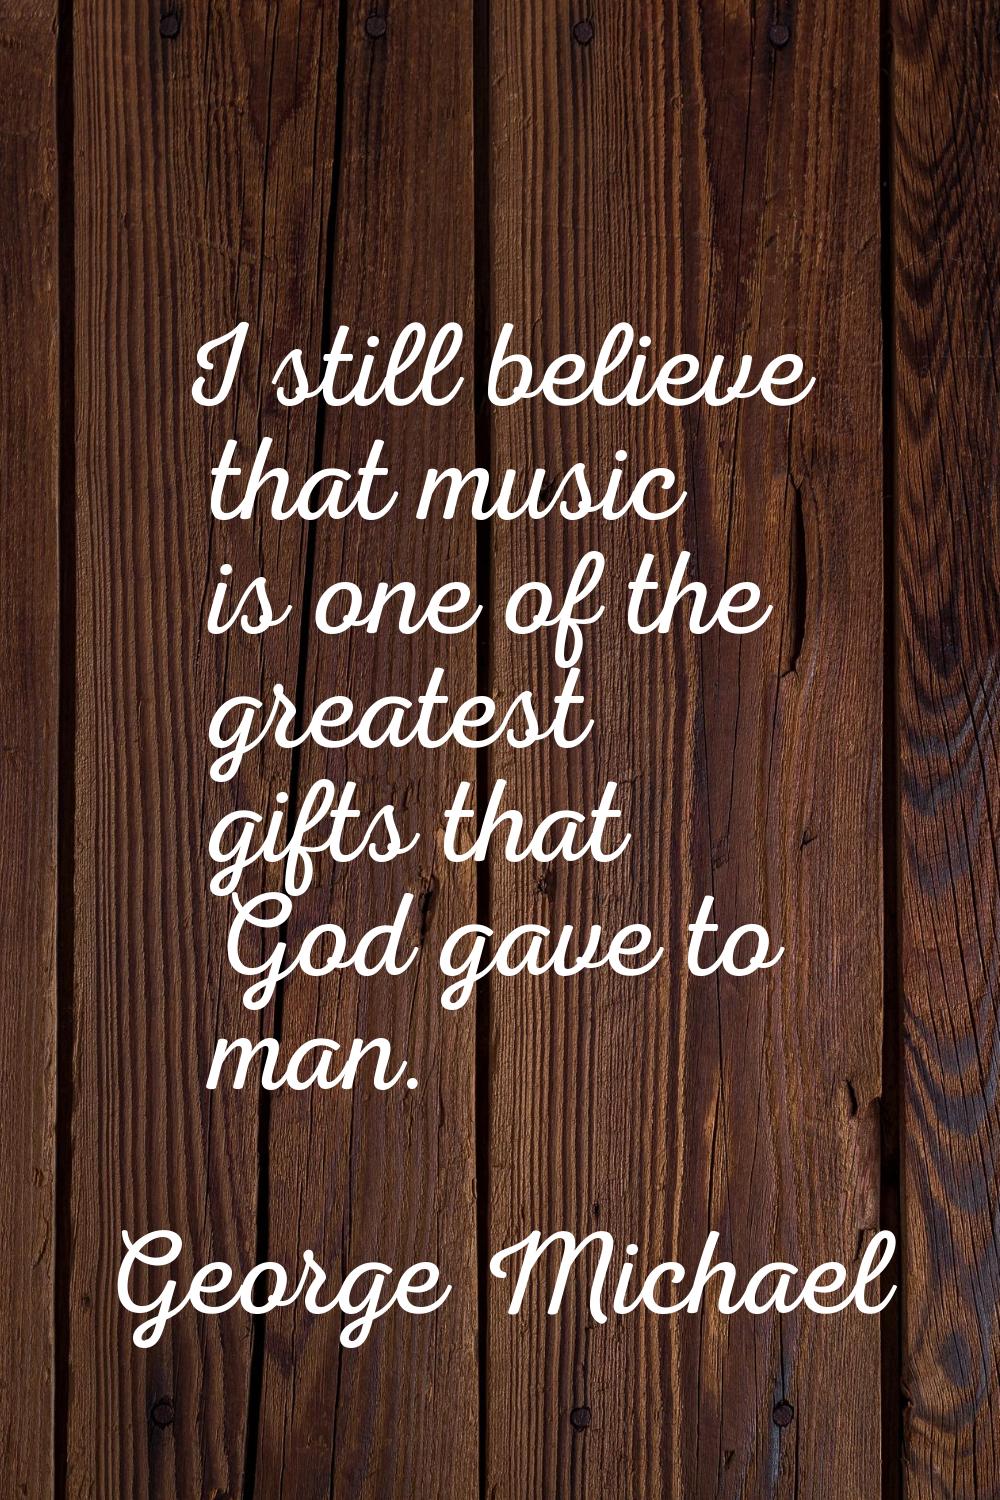 I still believe that music is one of the greatest gifts that God gave to man.